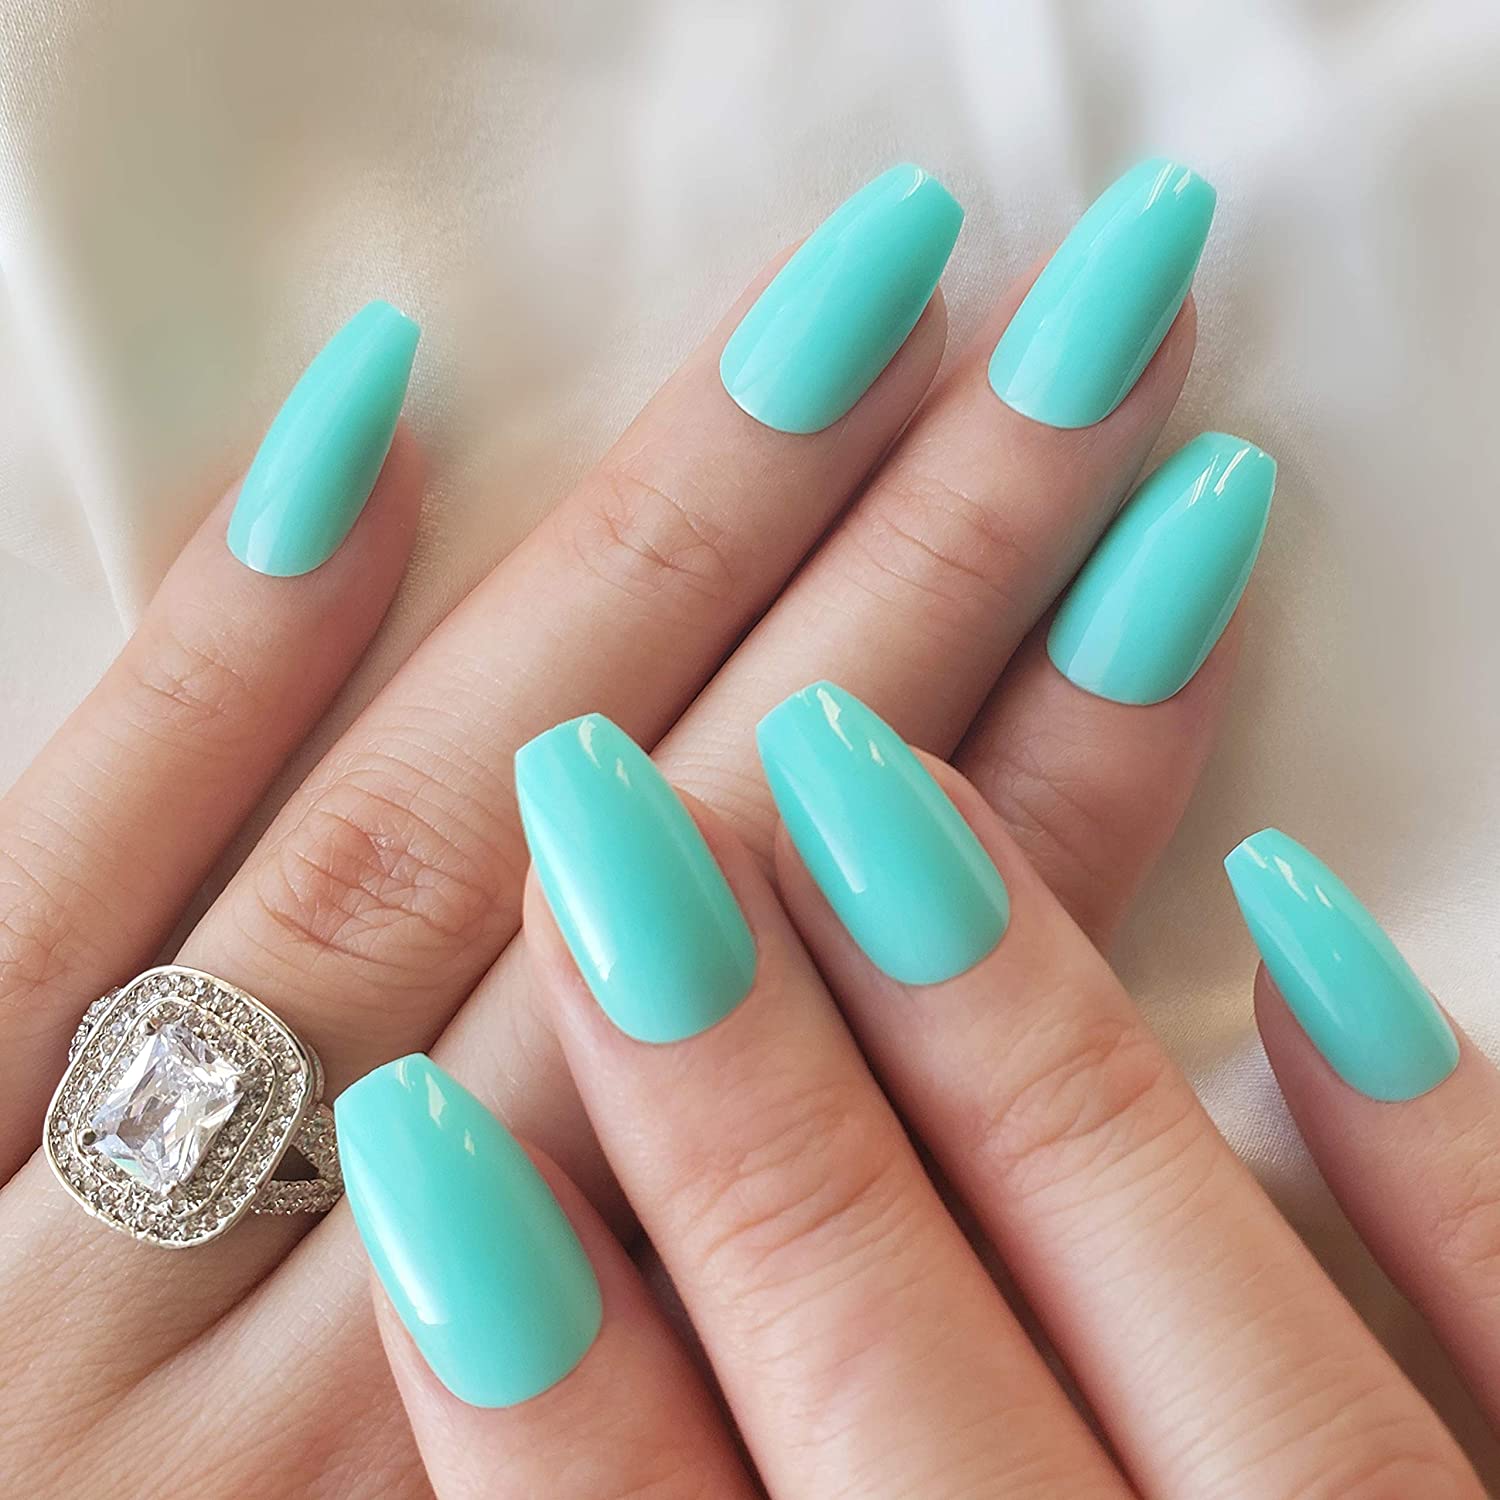 Turquoise. 70+ Most Popular Gel Nail Colors - 31